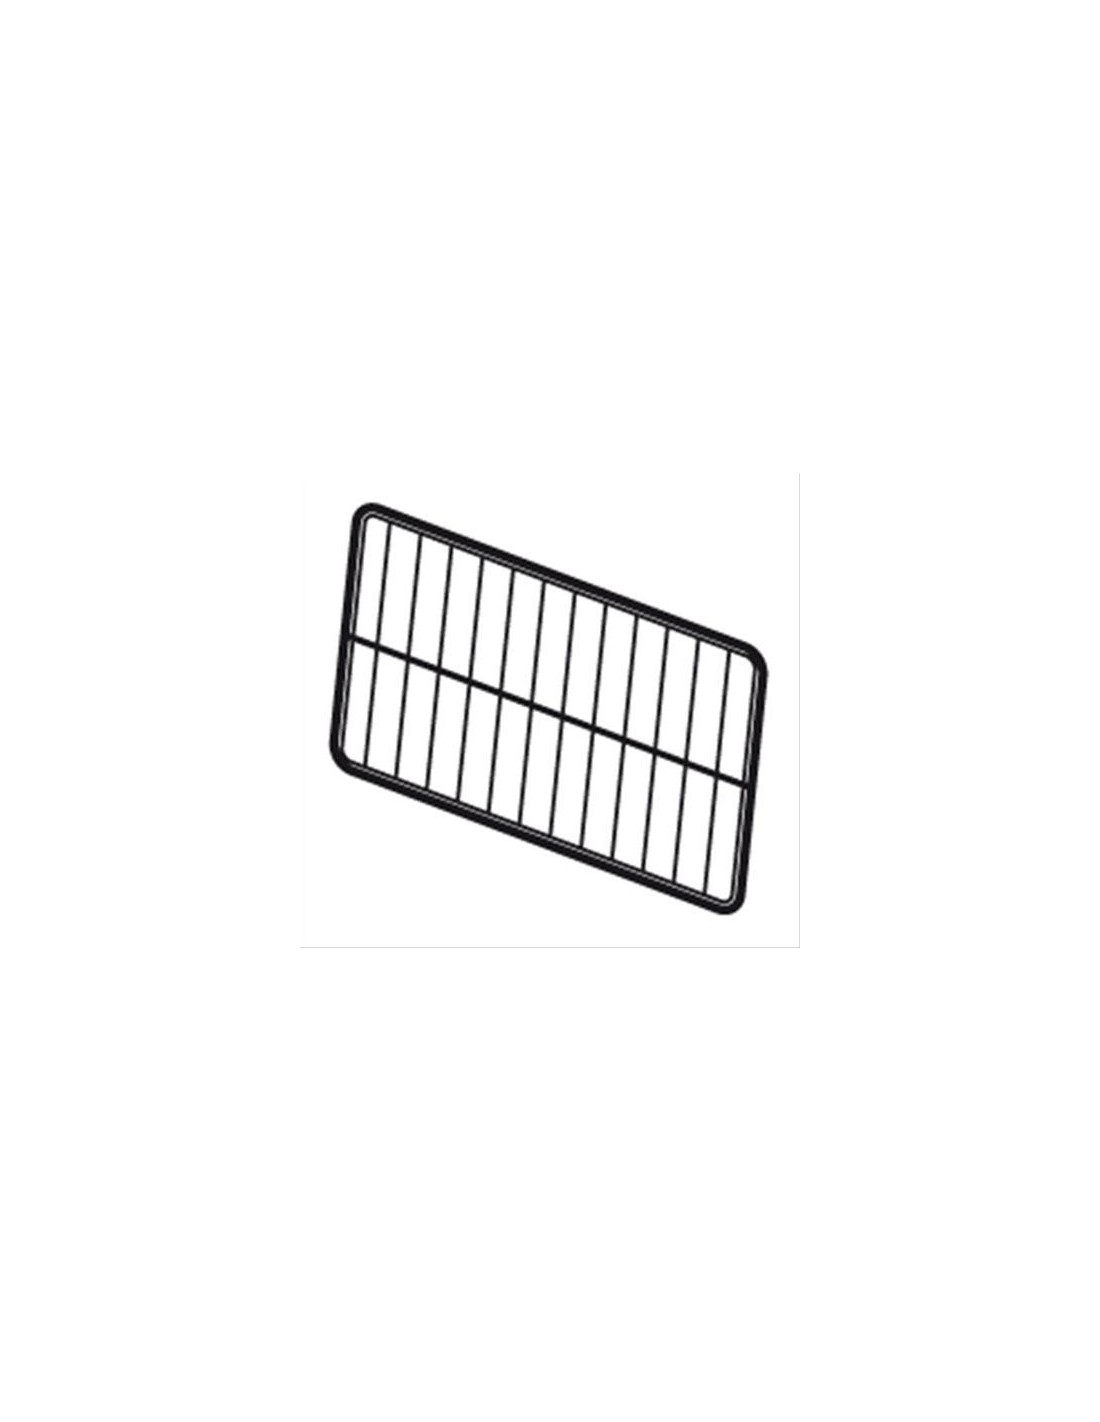 Internal grill for oven 53.5 x 45 cm - For model FO and FE